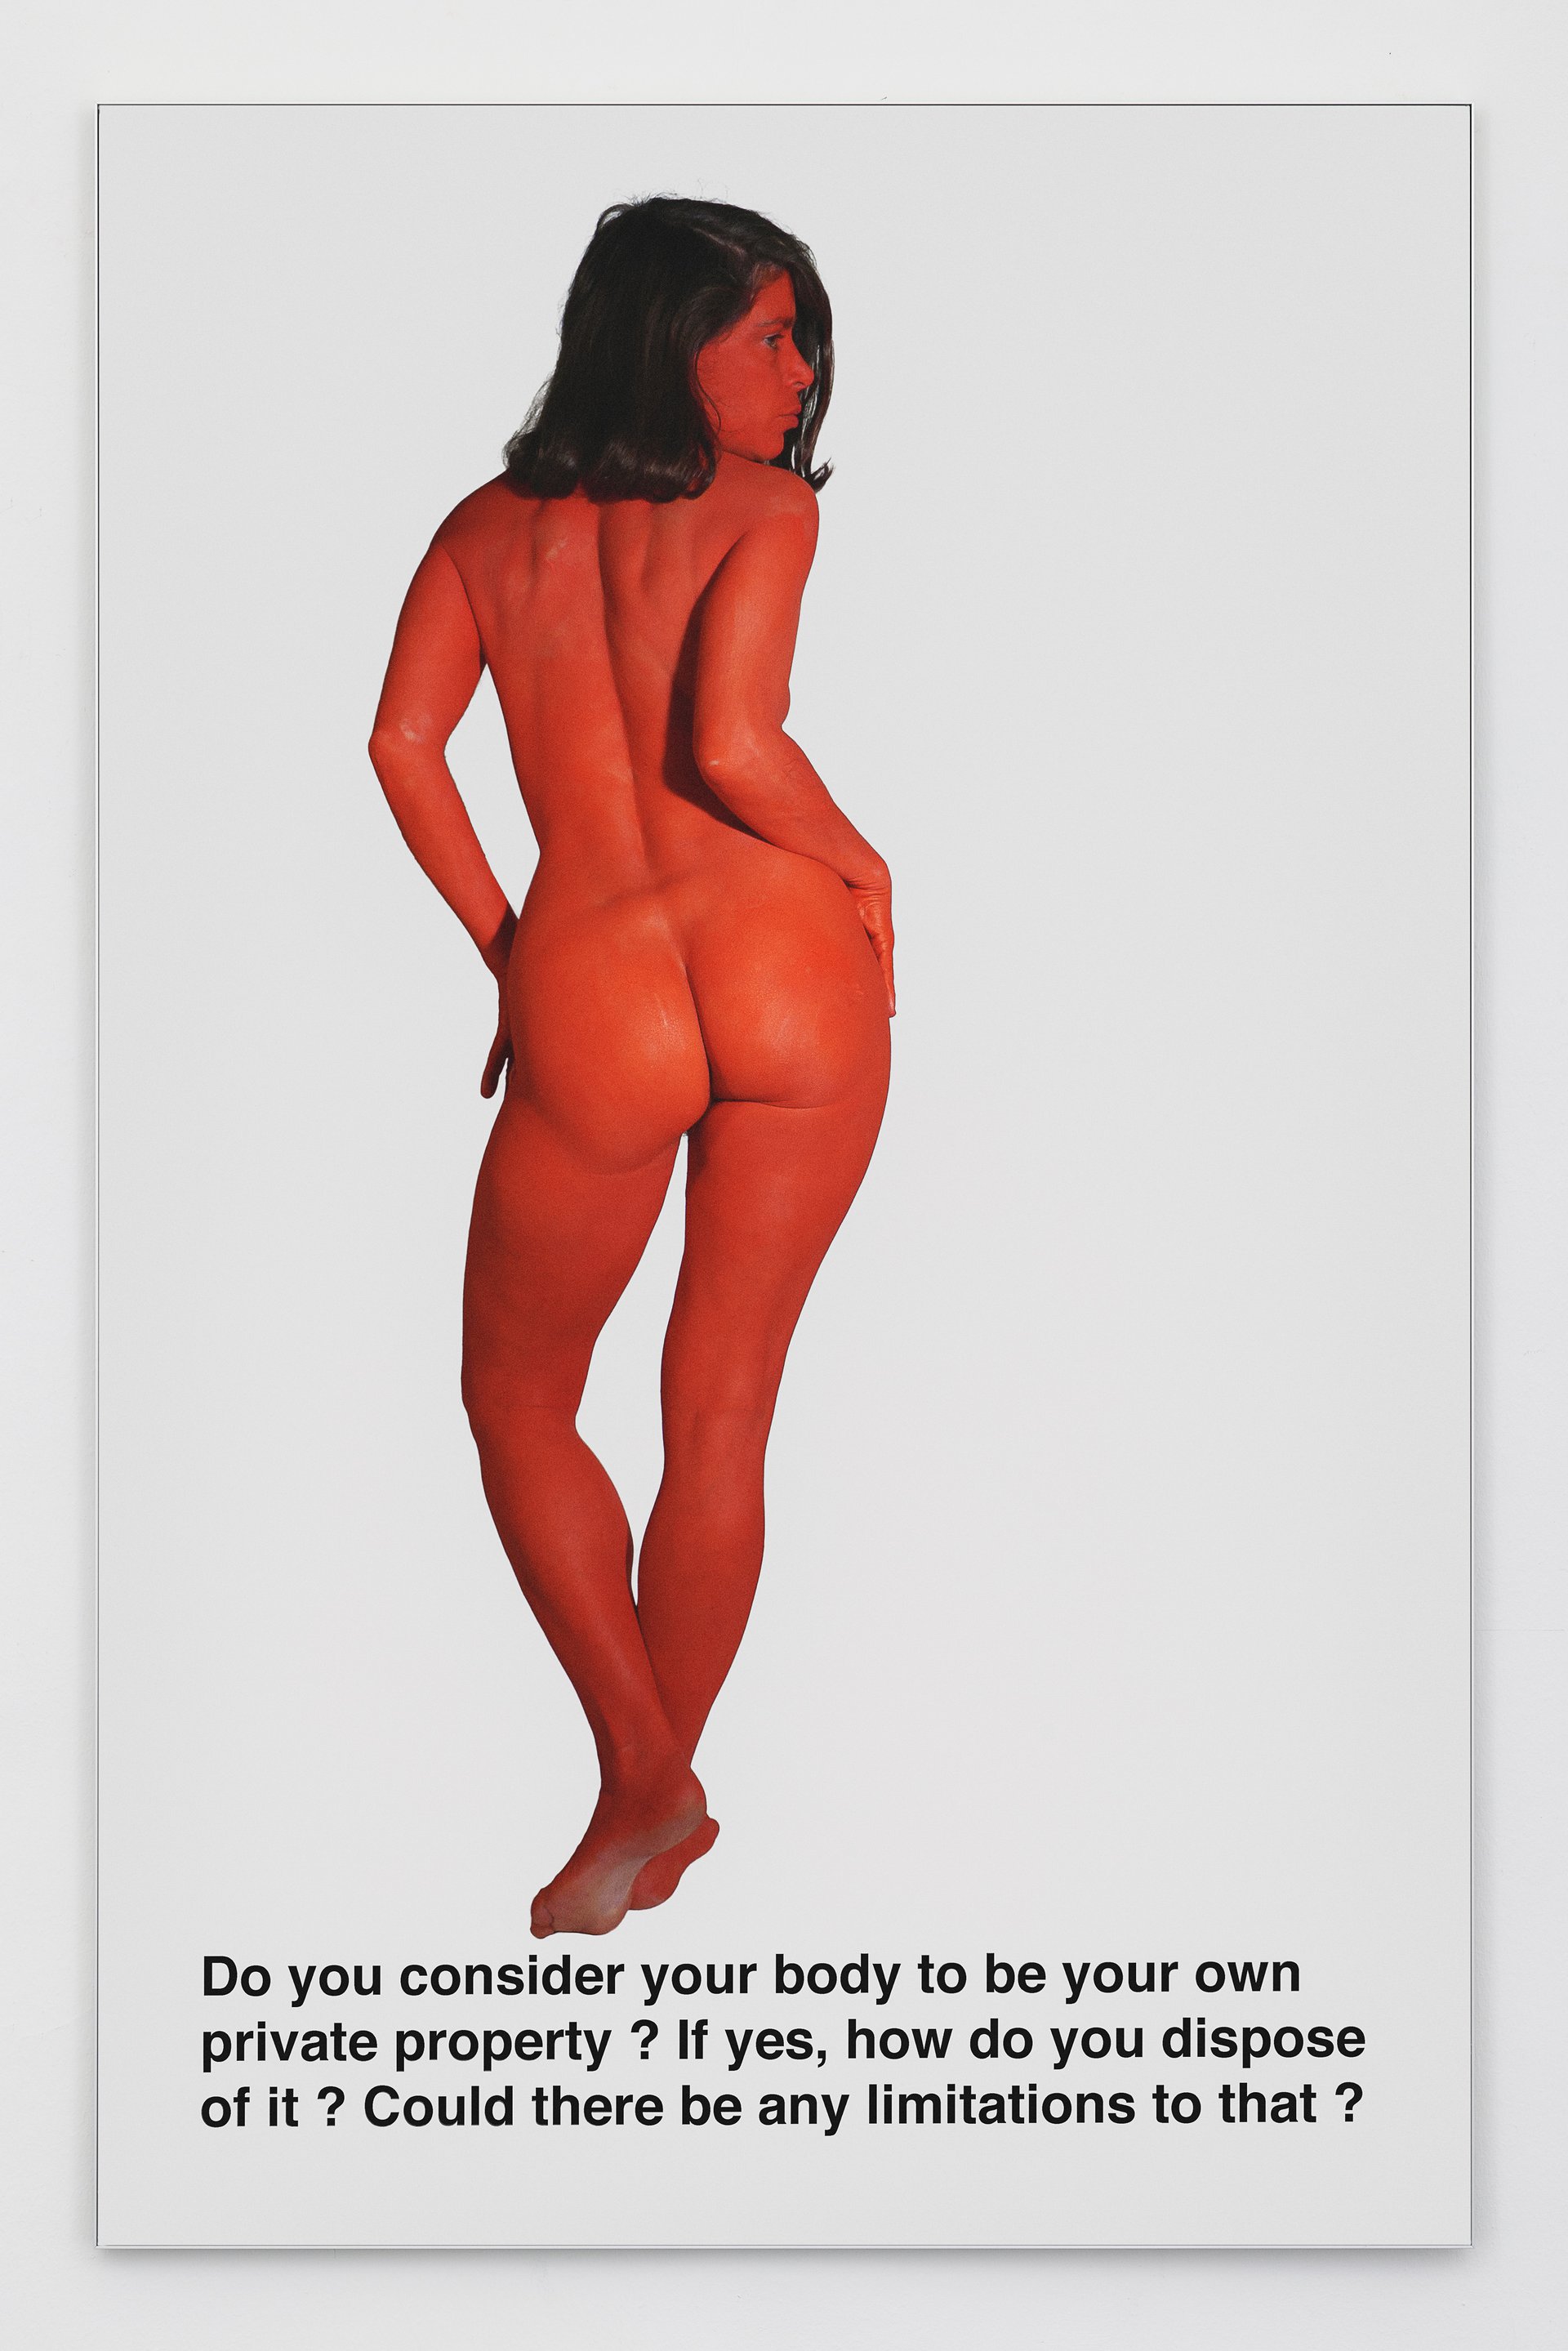 Lili Reynaud-DewarDo you consider your body to be your own private property ? If yes, how do you dispose of it ? Could there be any limitations to that ?, 2022Print on Dynajet foil mounted on aluminium frame90 x 140 cm